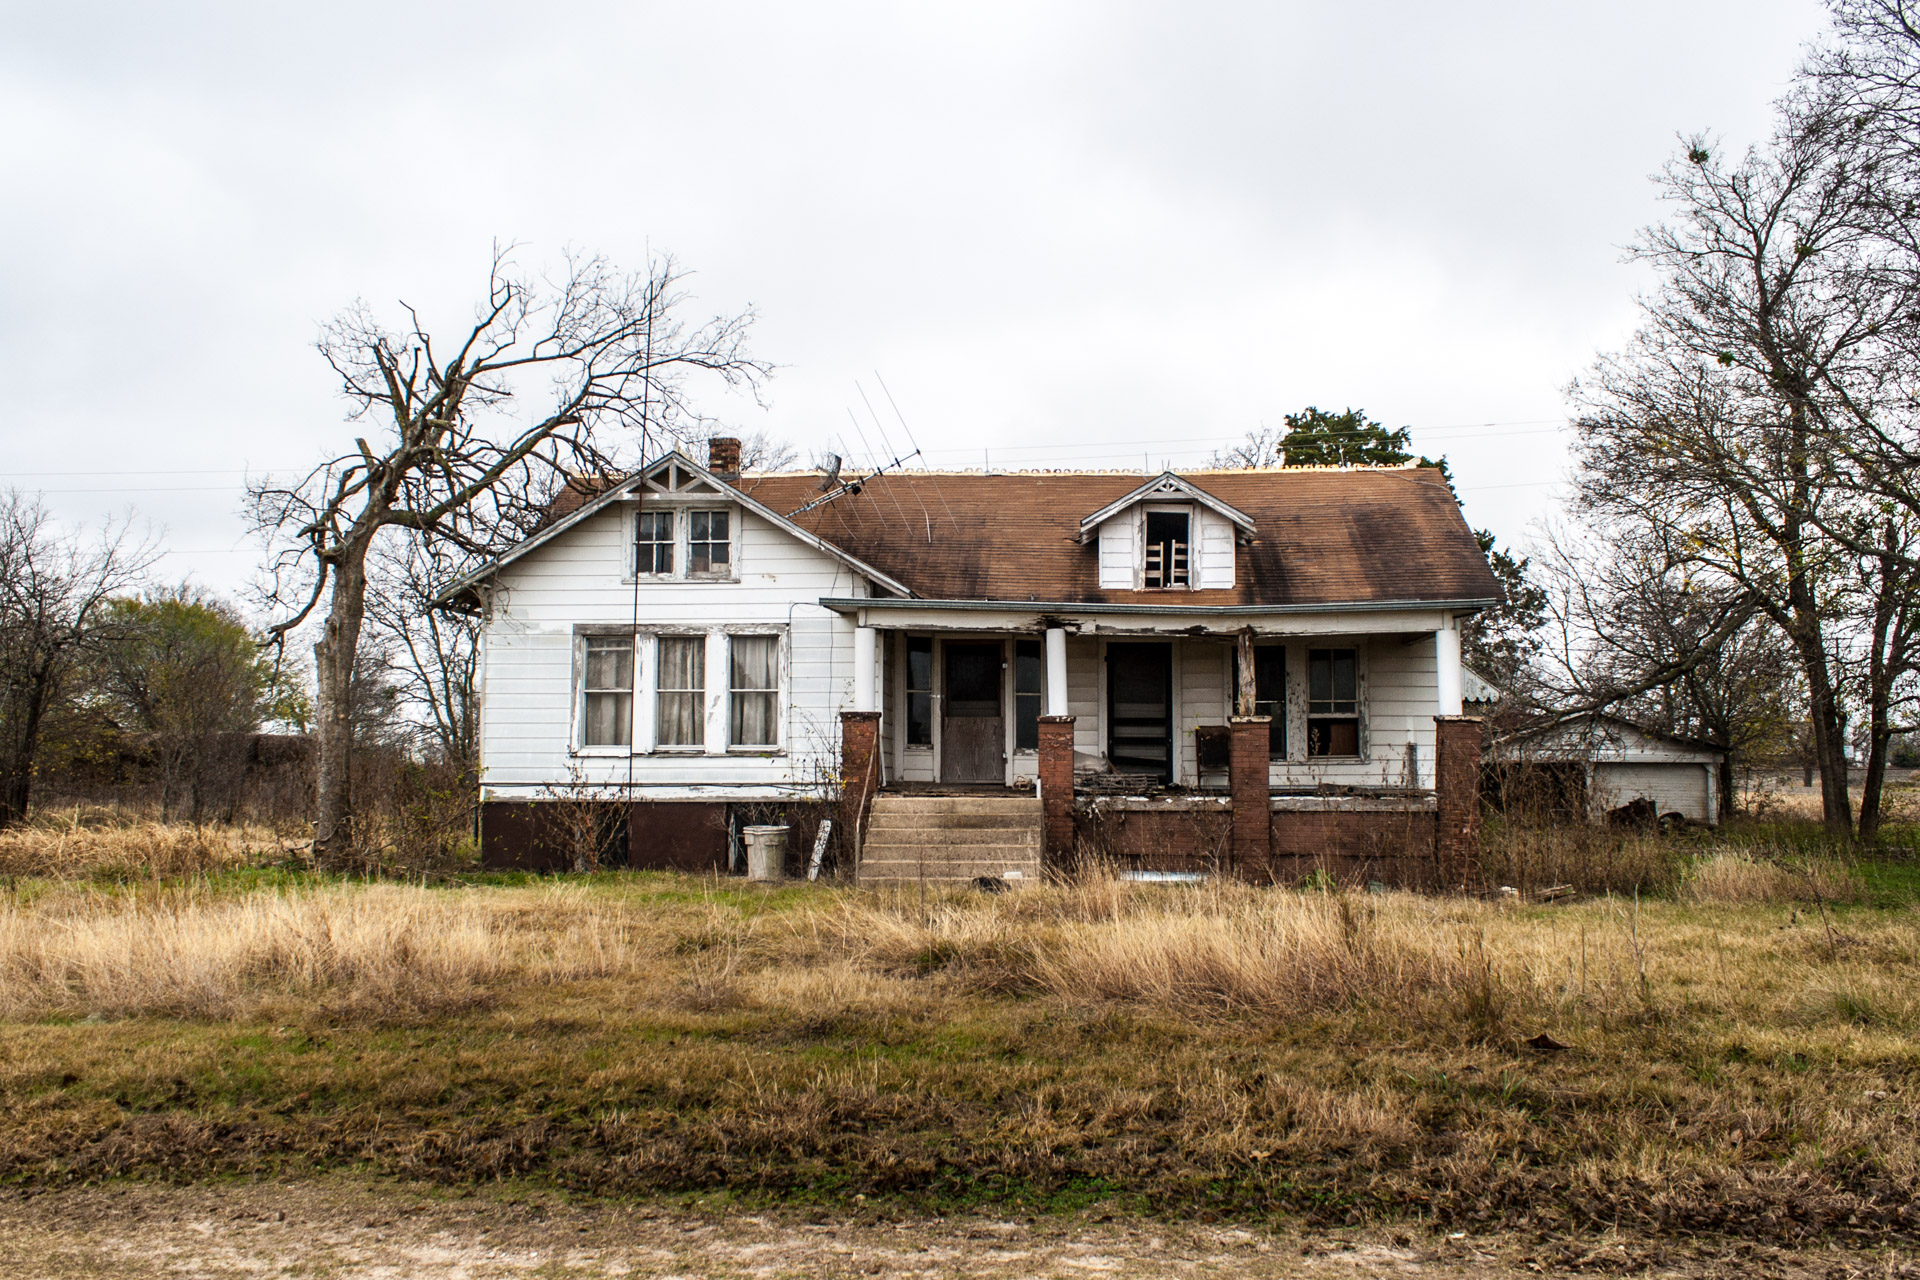 Buckholts, Texas - The Two Front Door House (front far)